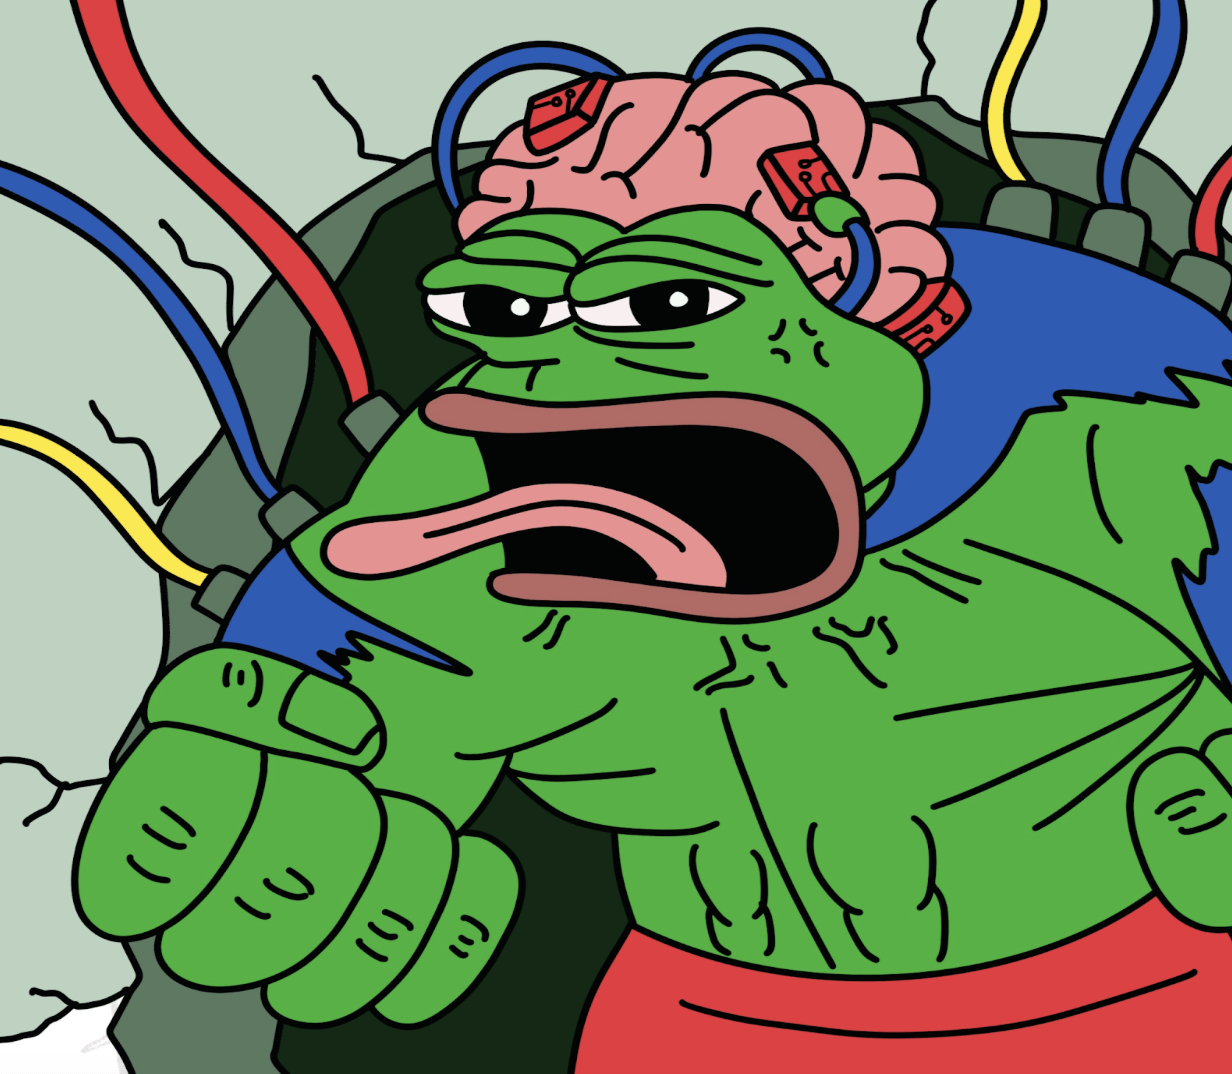 Pepe Unchained Hits $5 Million Milestone In Presale - Next 100x Meme Coin?